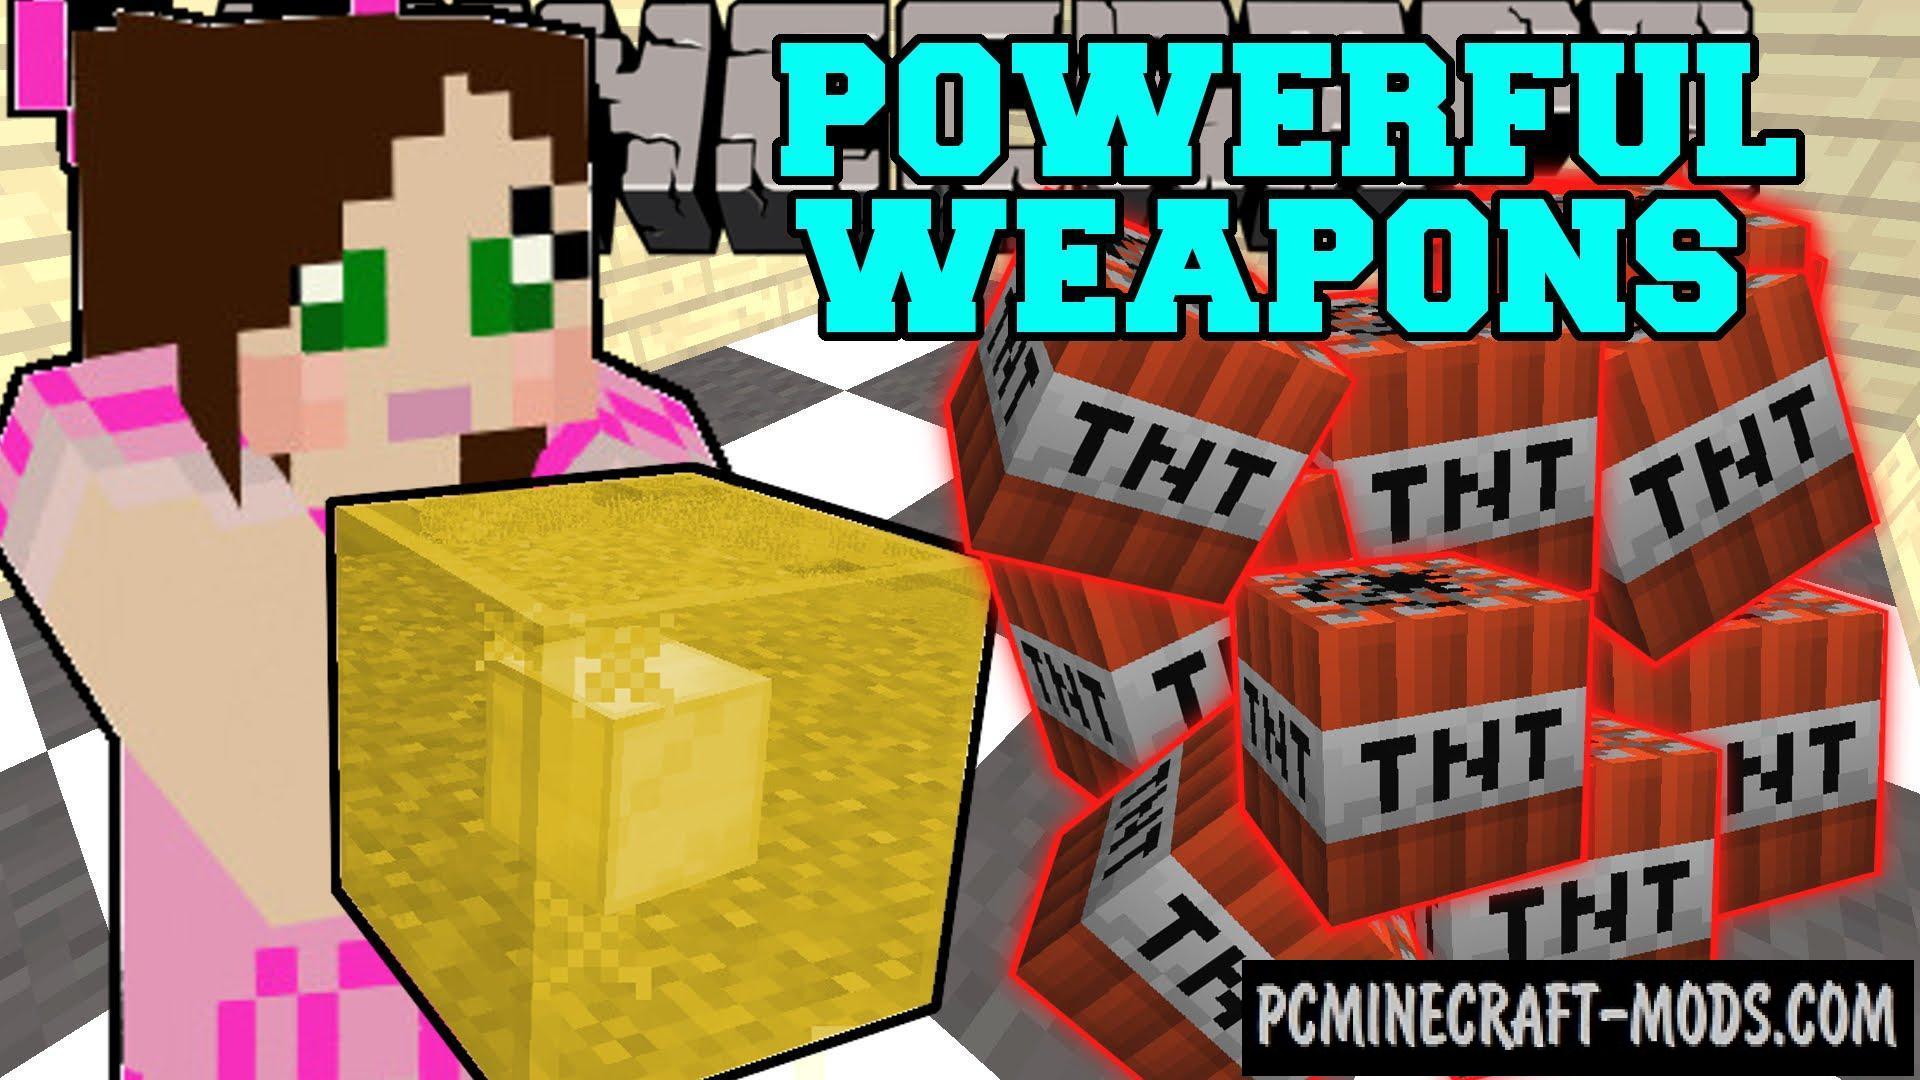 Powerful Weapons Command Block For Minecraft 1.8.9